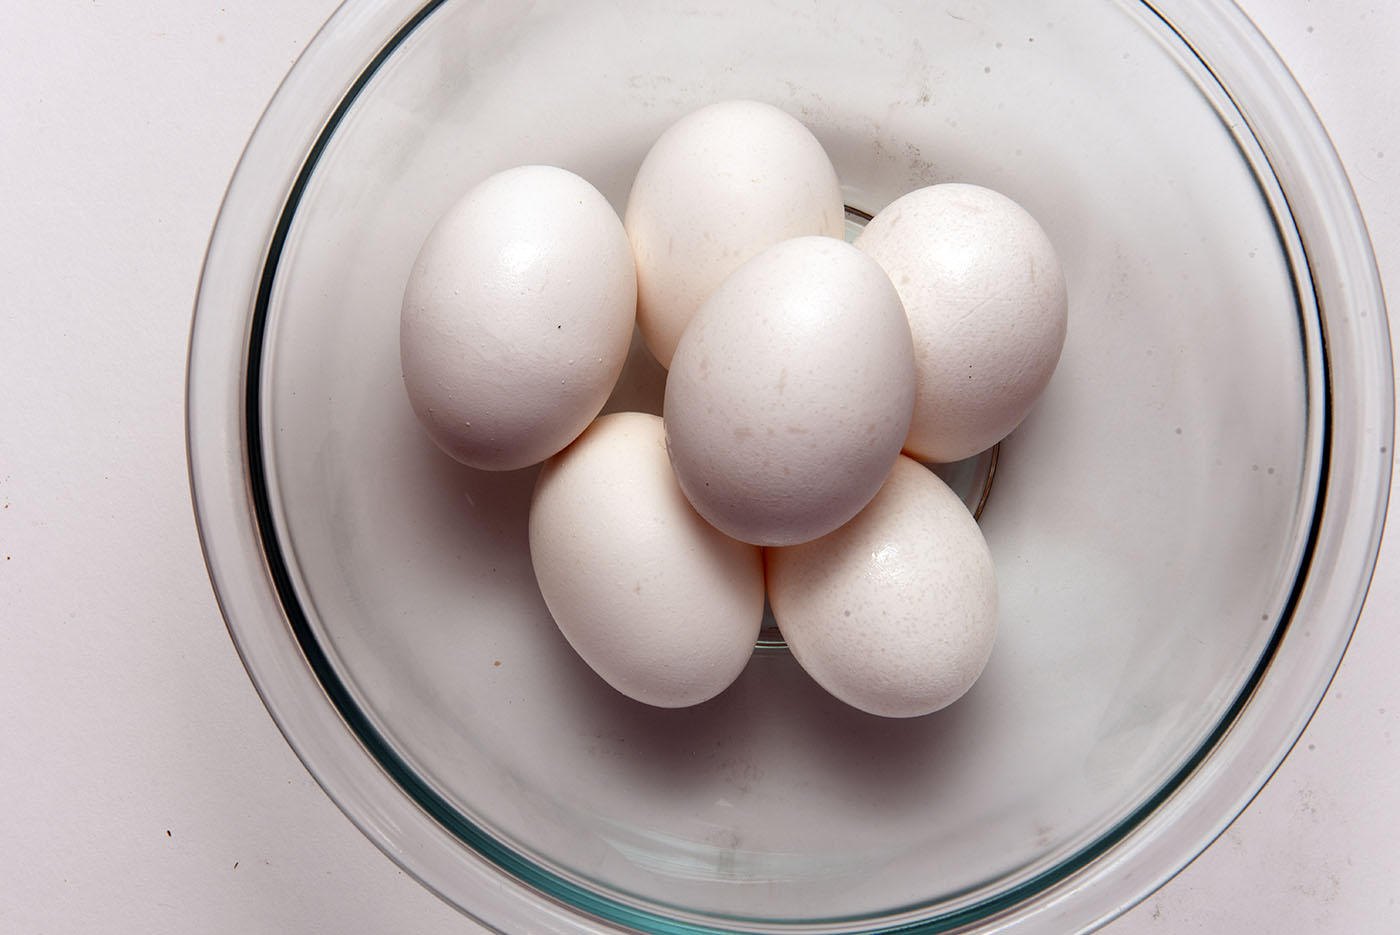 A clear glass bowl holding six boiled eggs.